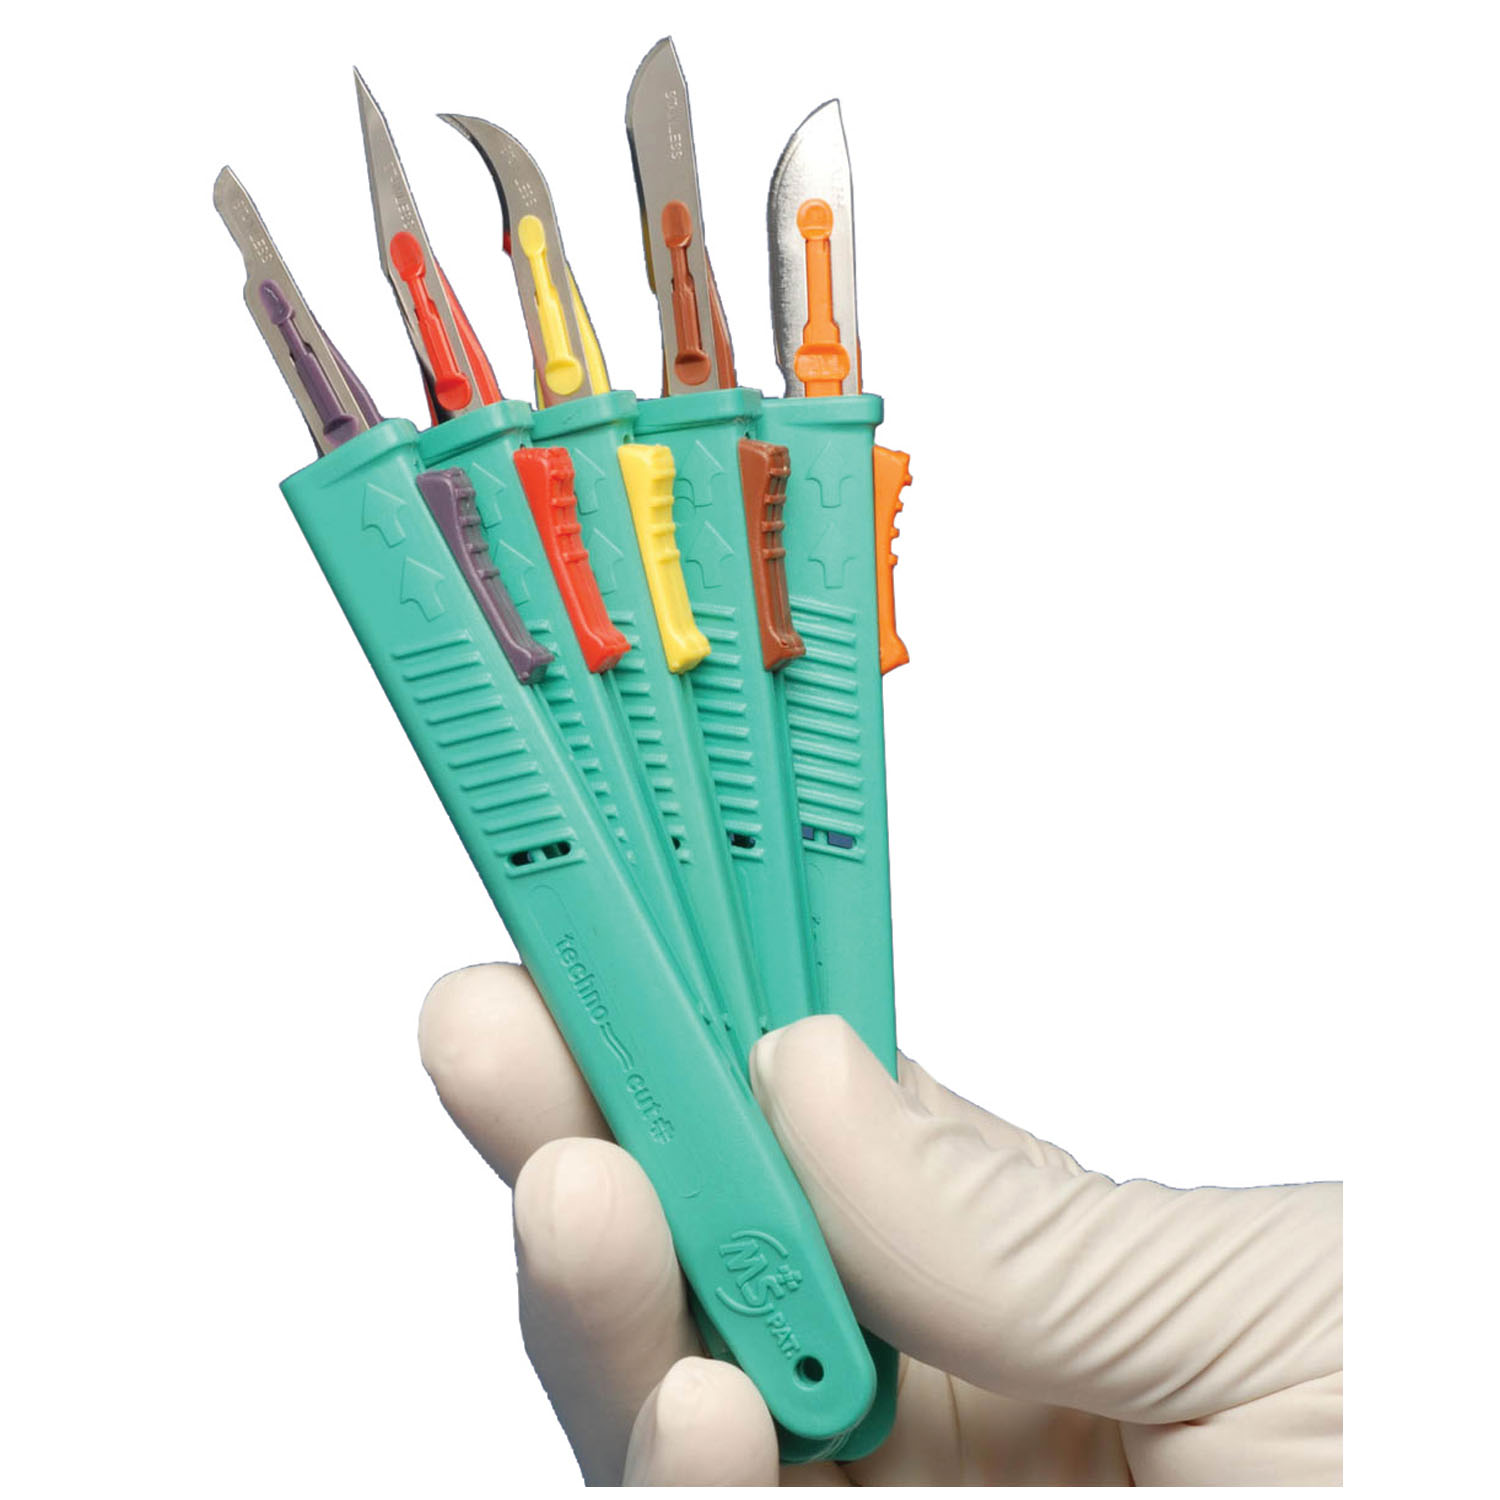 MYCO DISPOSABLE RELI-CUT SAFETY SCALPELS : 6008TR-11 BX $13.40 Stocked